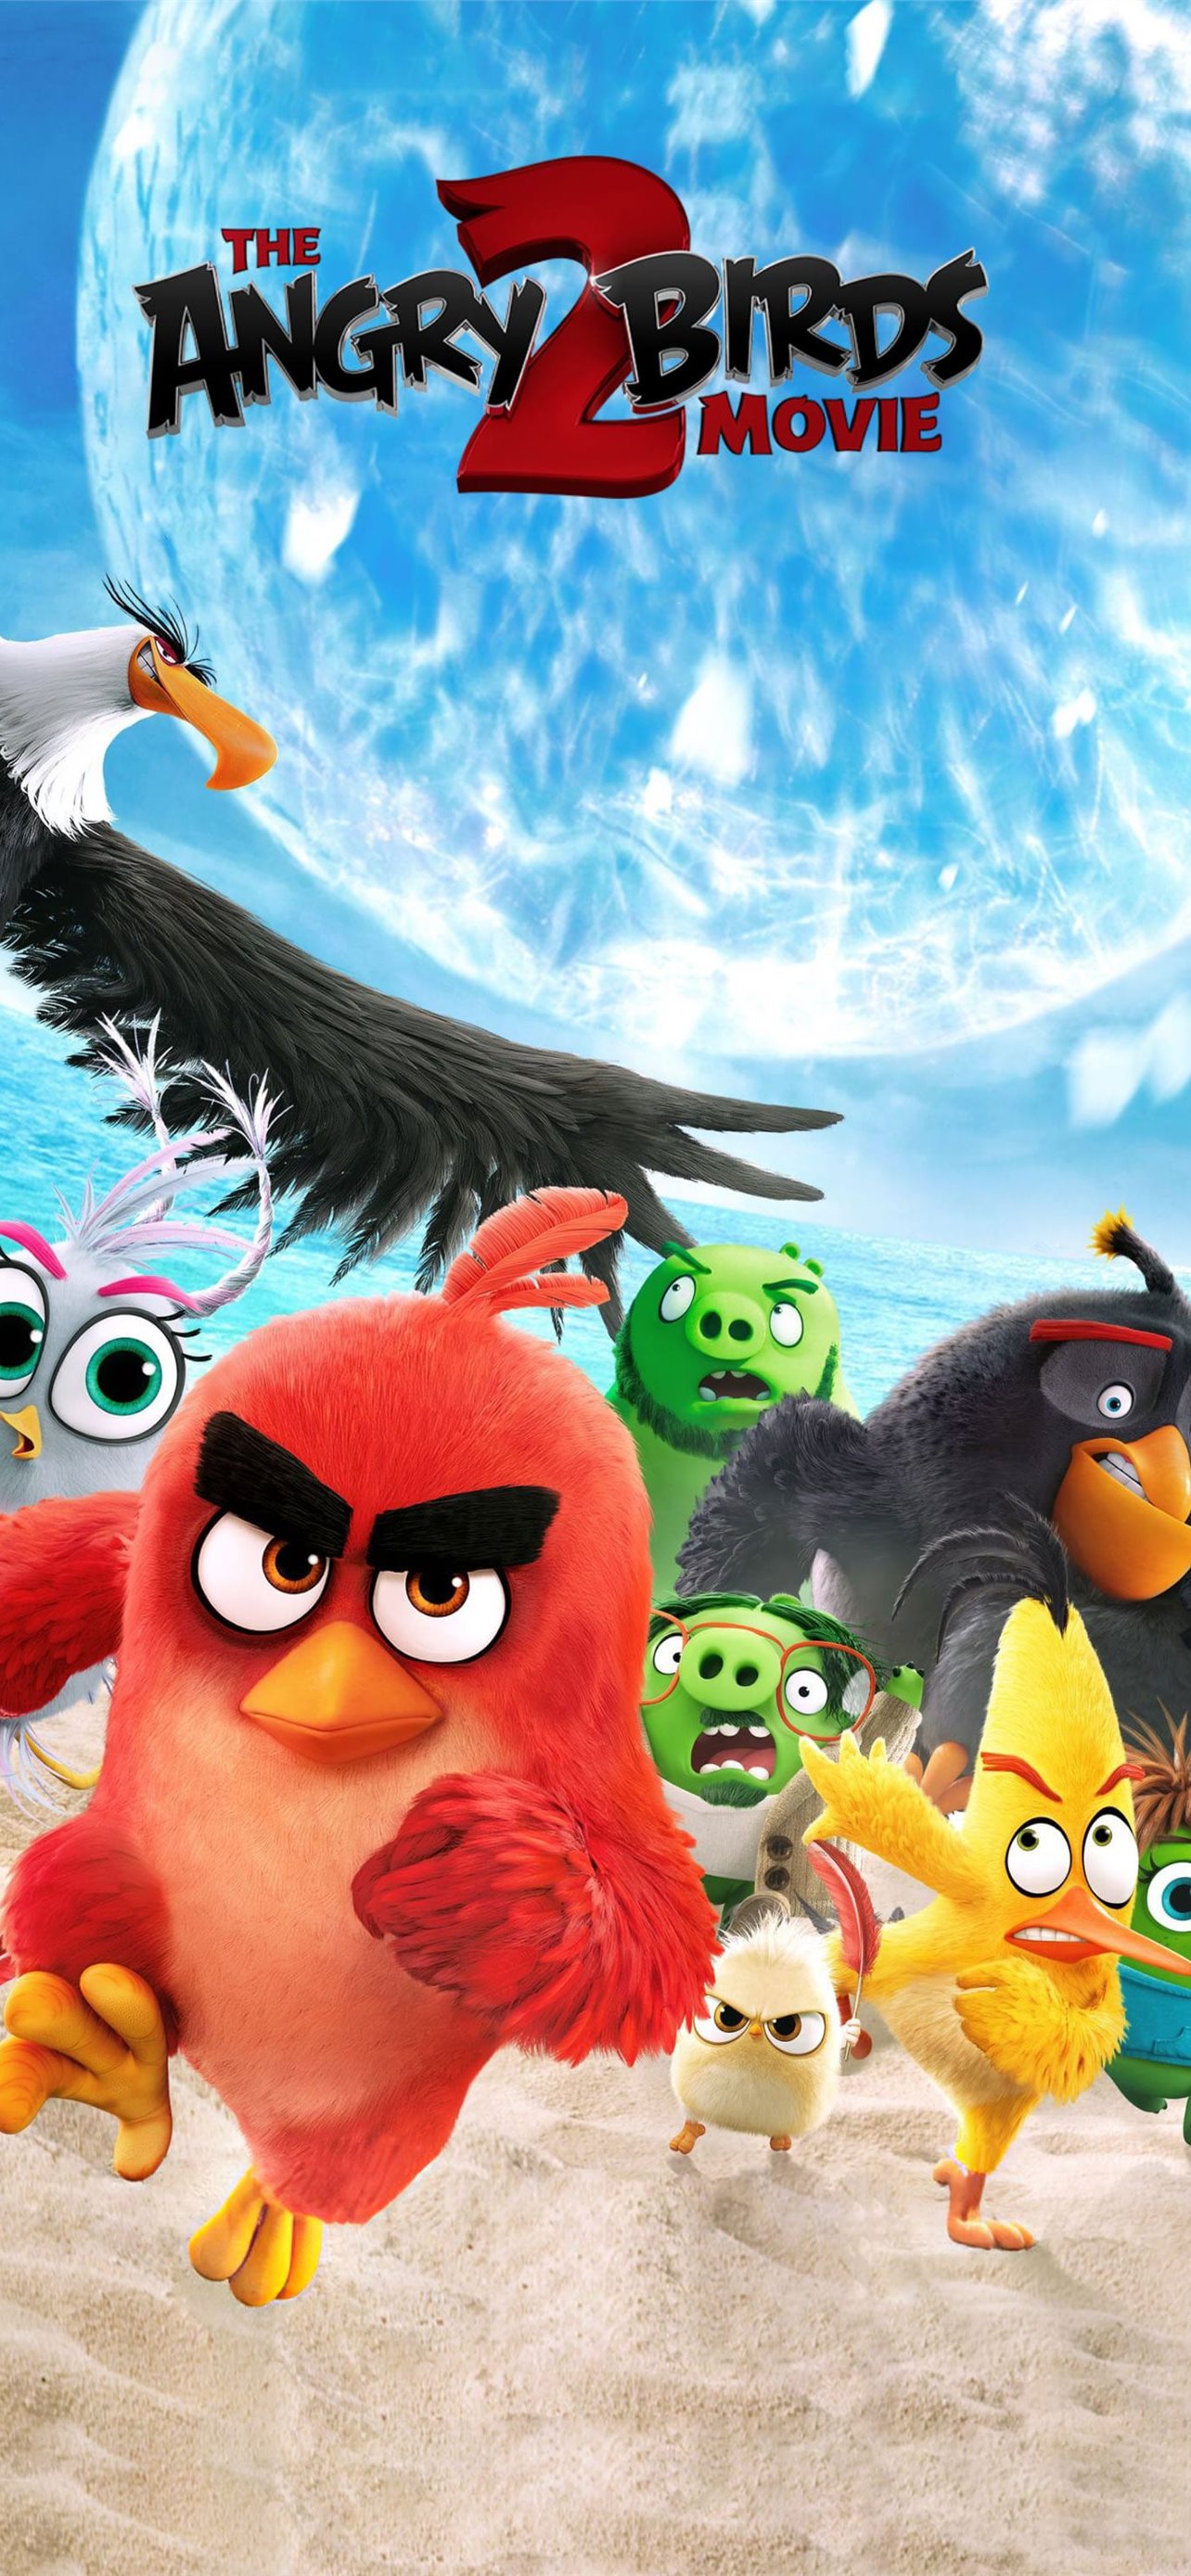 Angry Birds 2 Movie Iphone Wallpapers Free Download